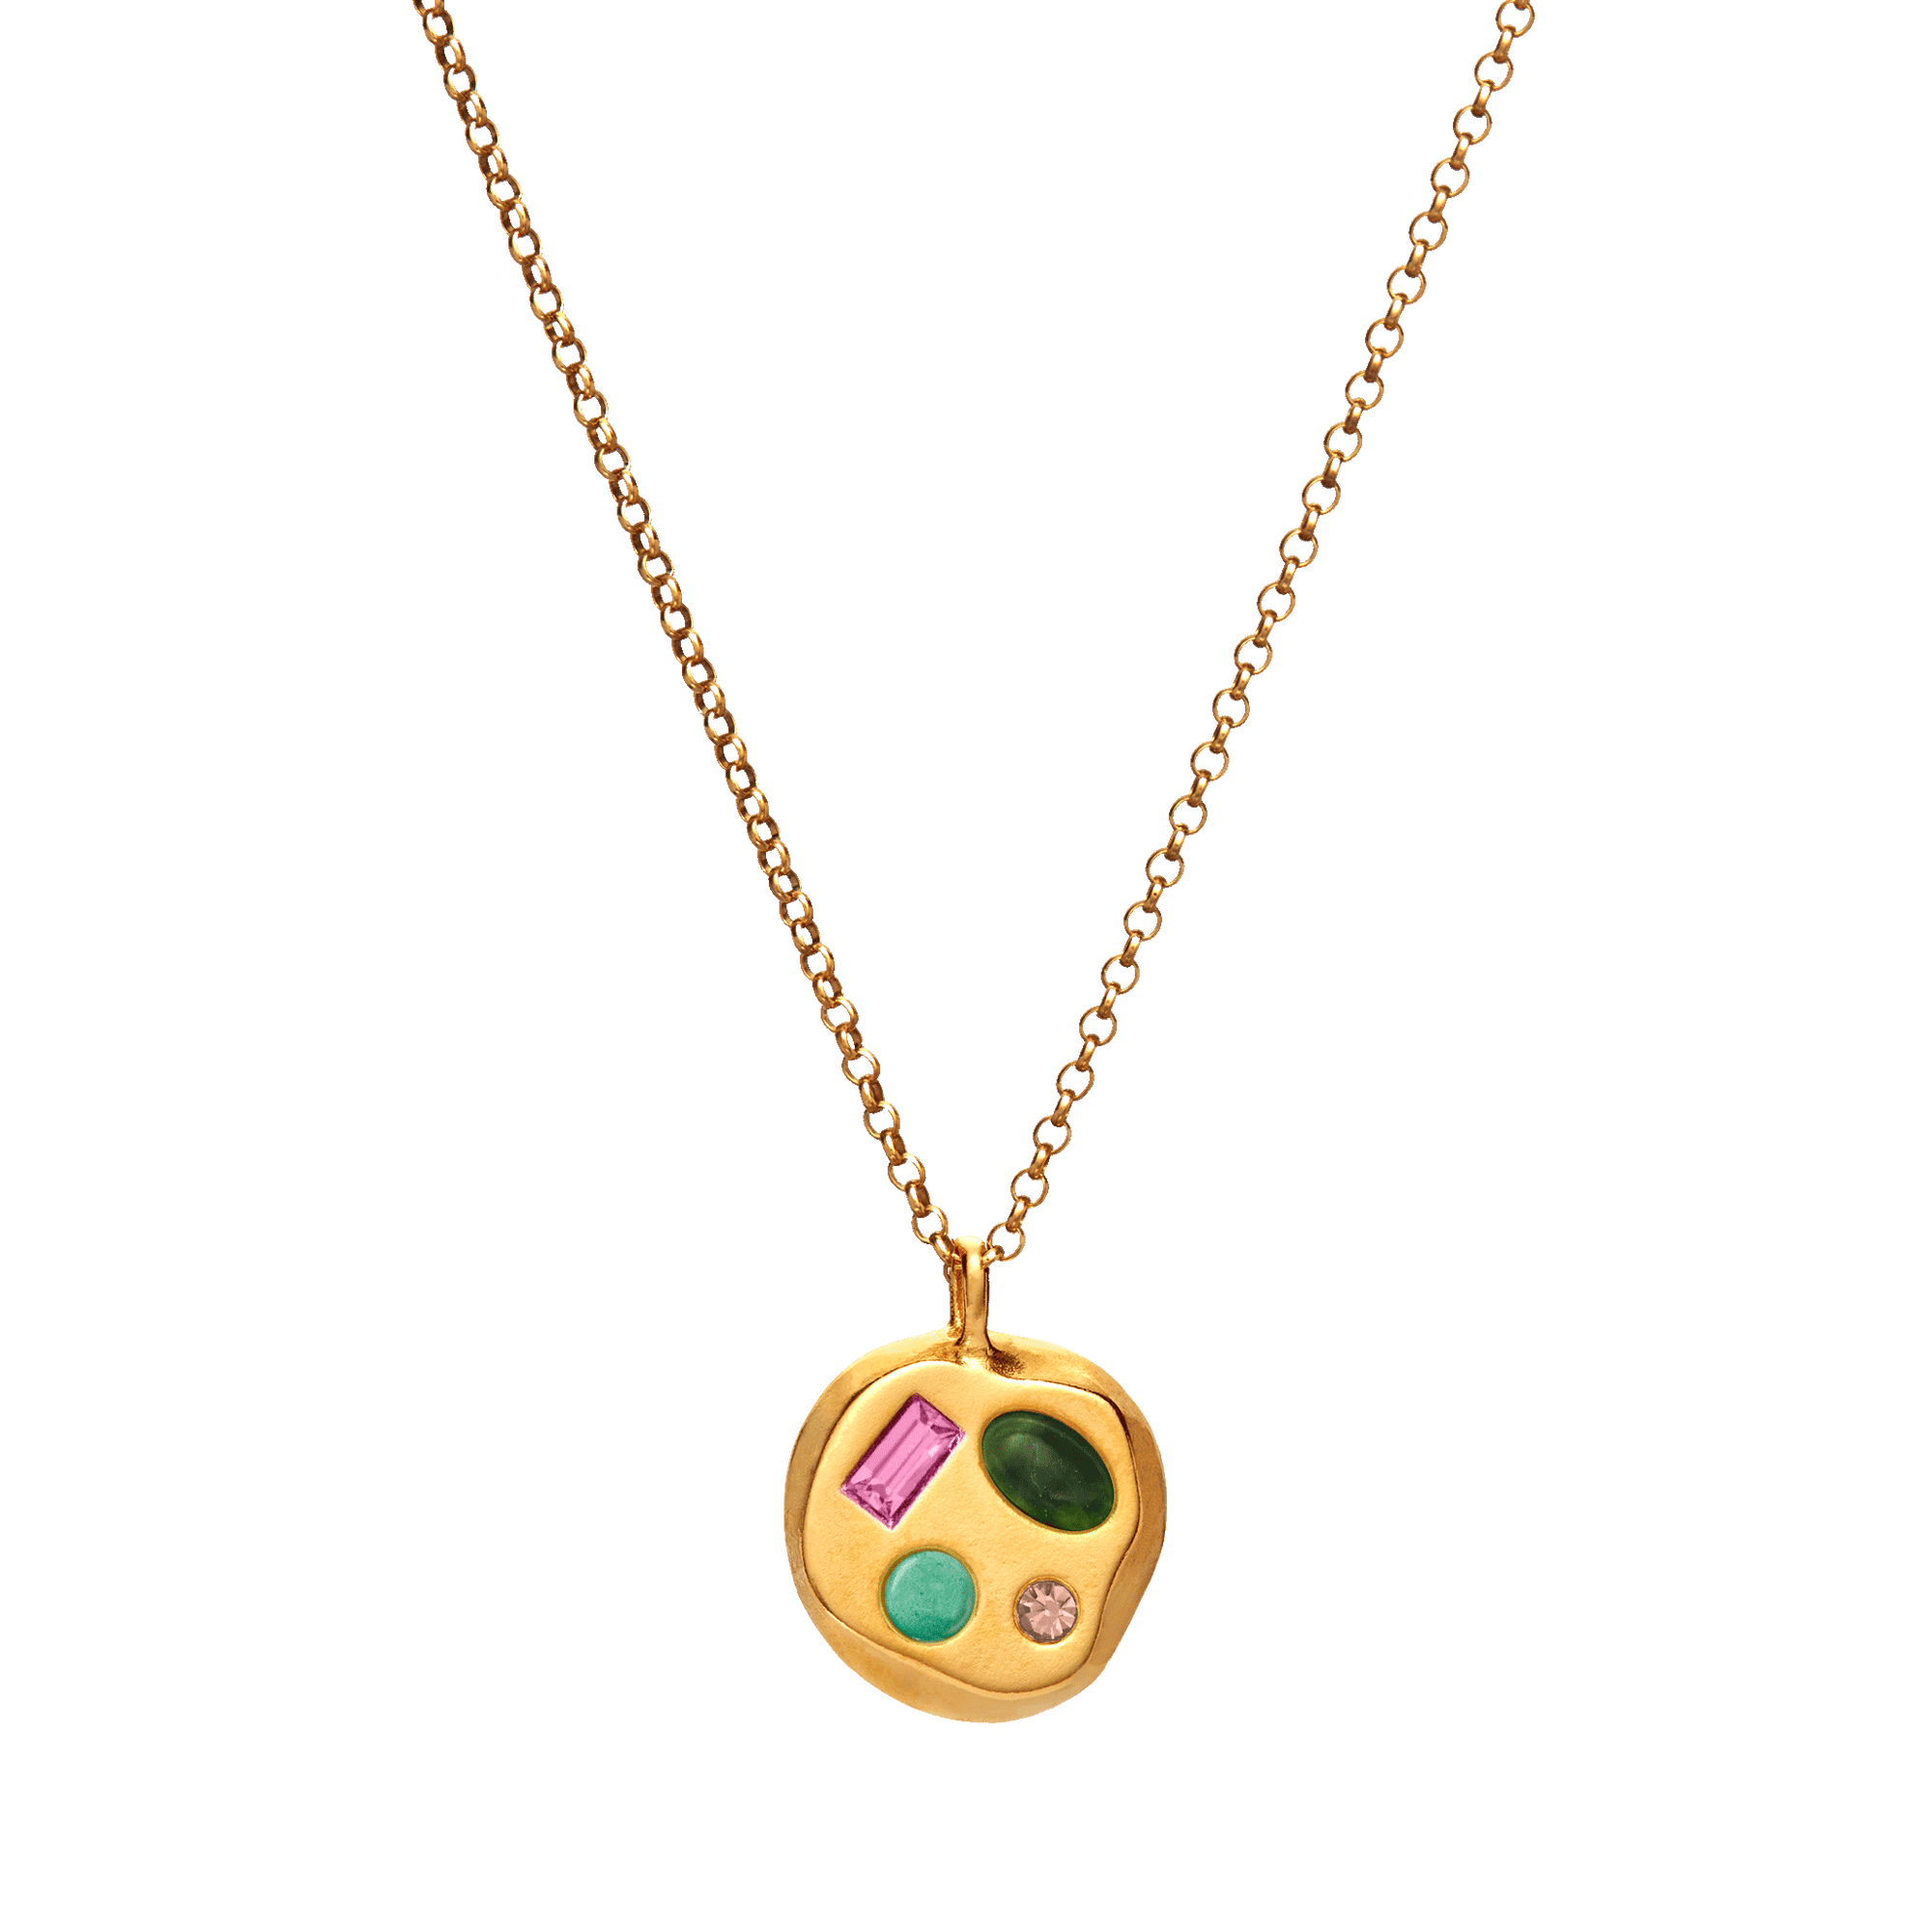 The October Fourth Pendant